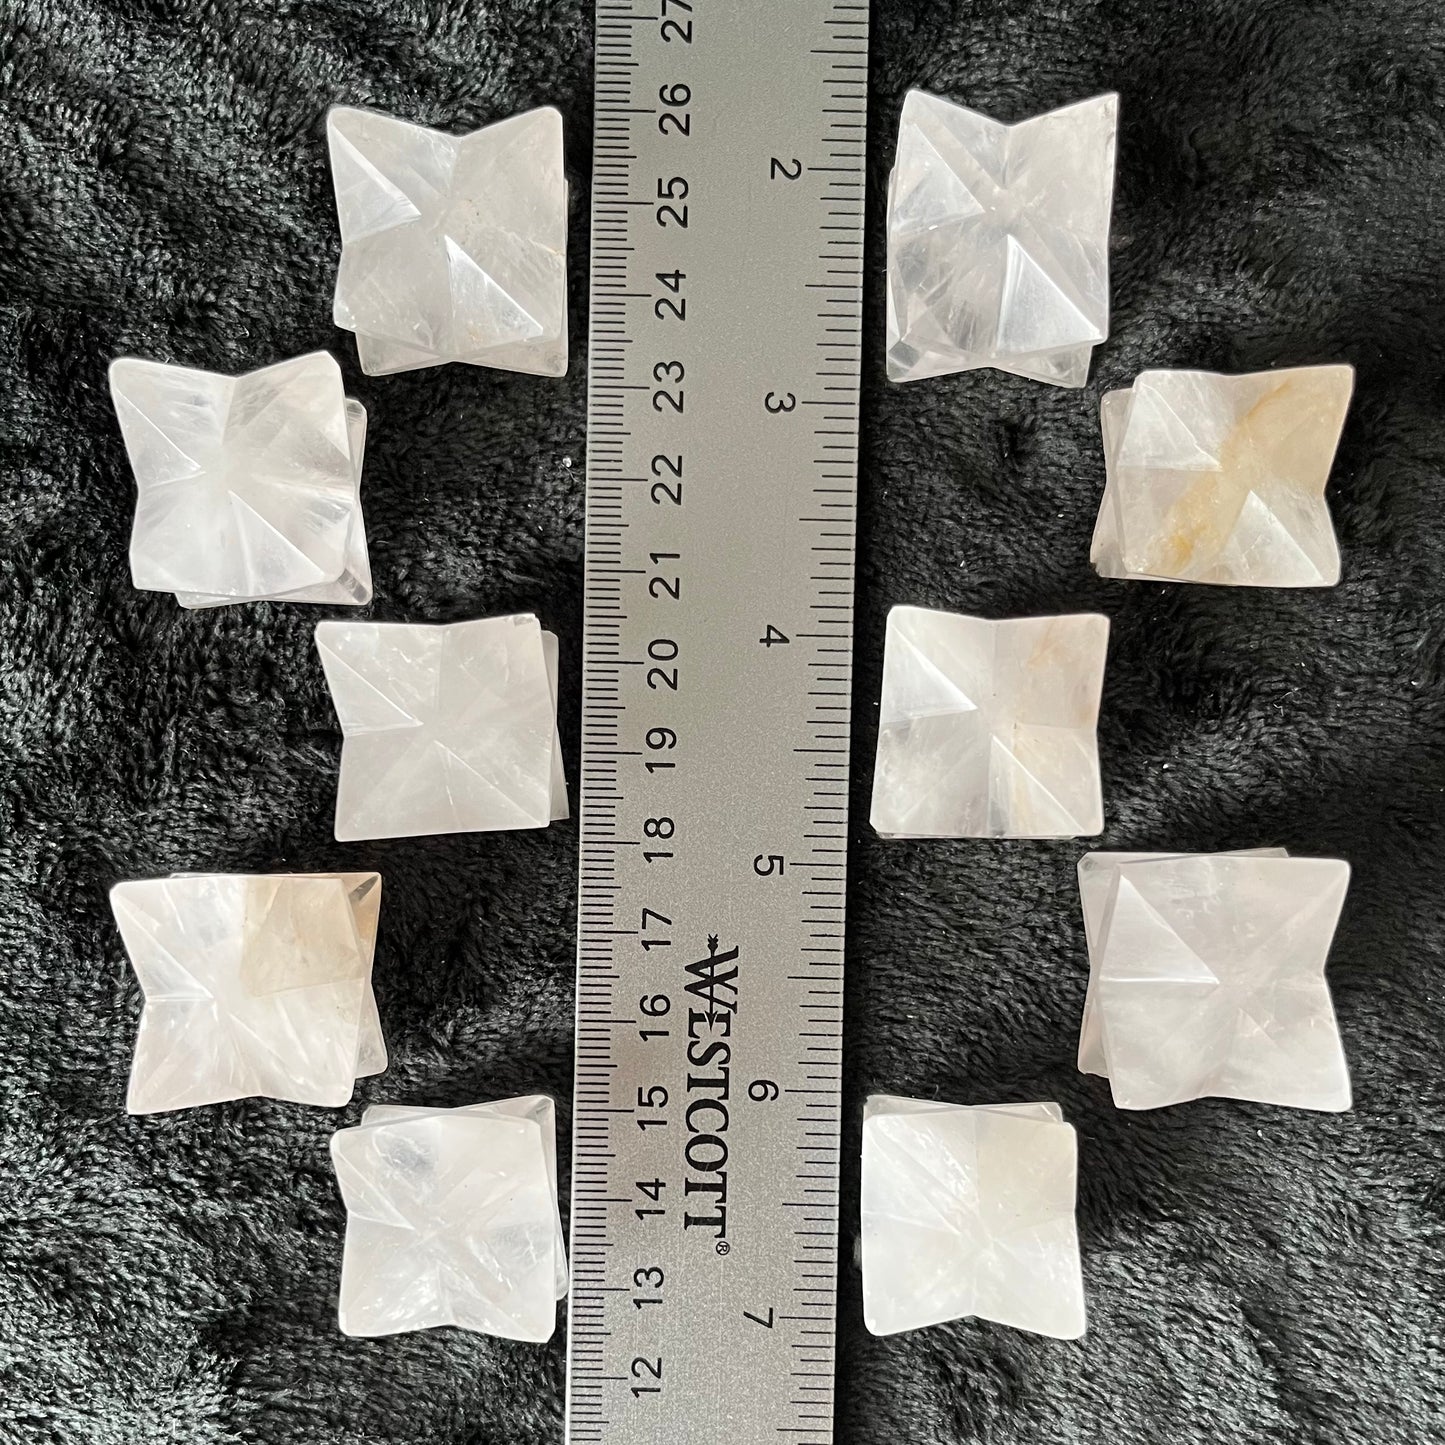 10 Large quartz merkaba stones, radiant with crystalline energy, ideal for meditation and spiritual practices, displayed next to a ruler. Quartz McCall the stones are approximately 1 inch in diameter.